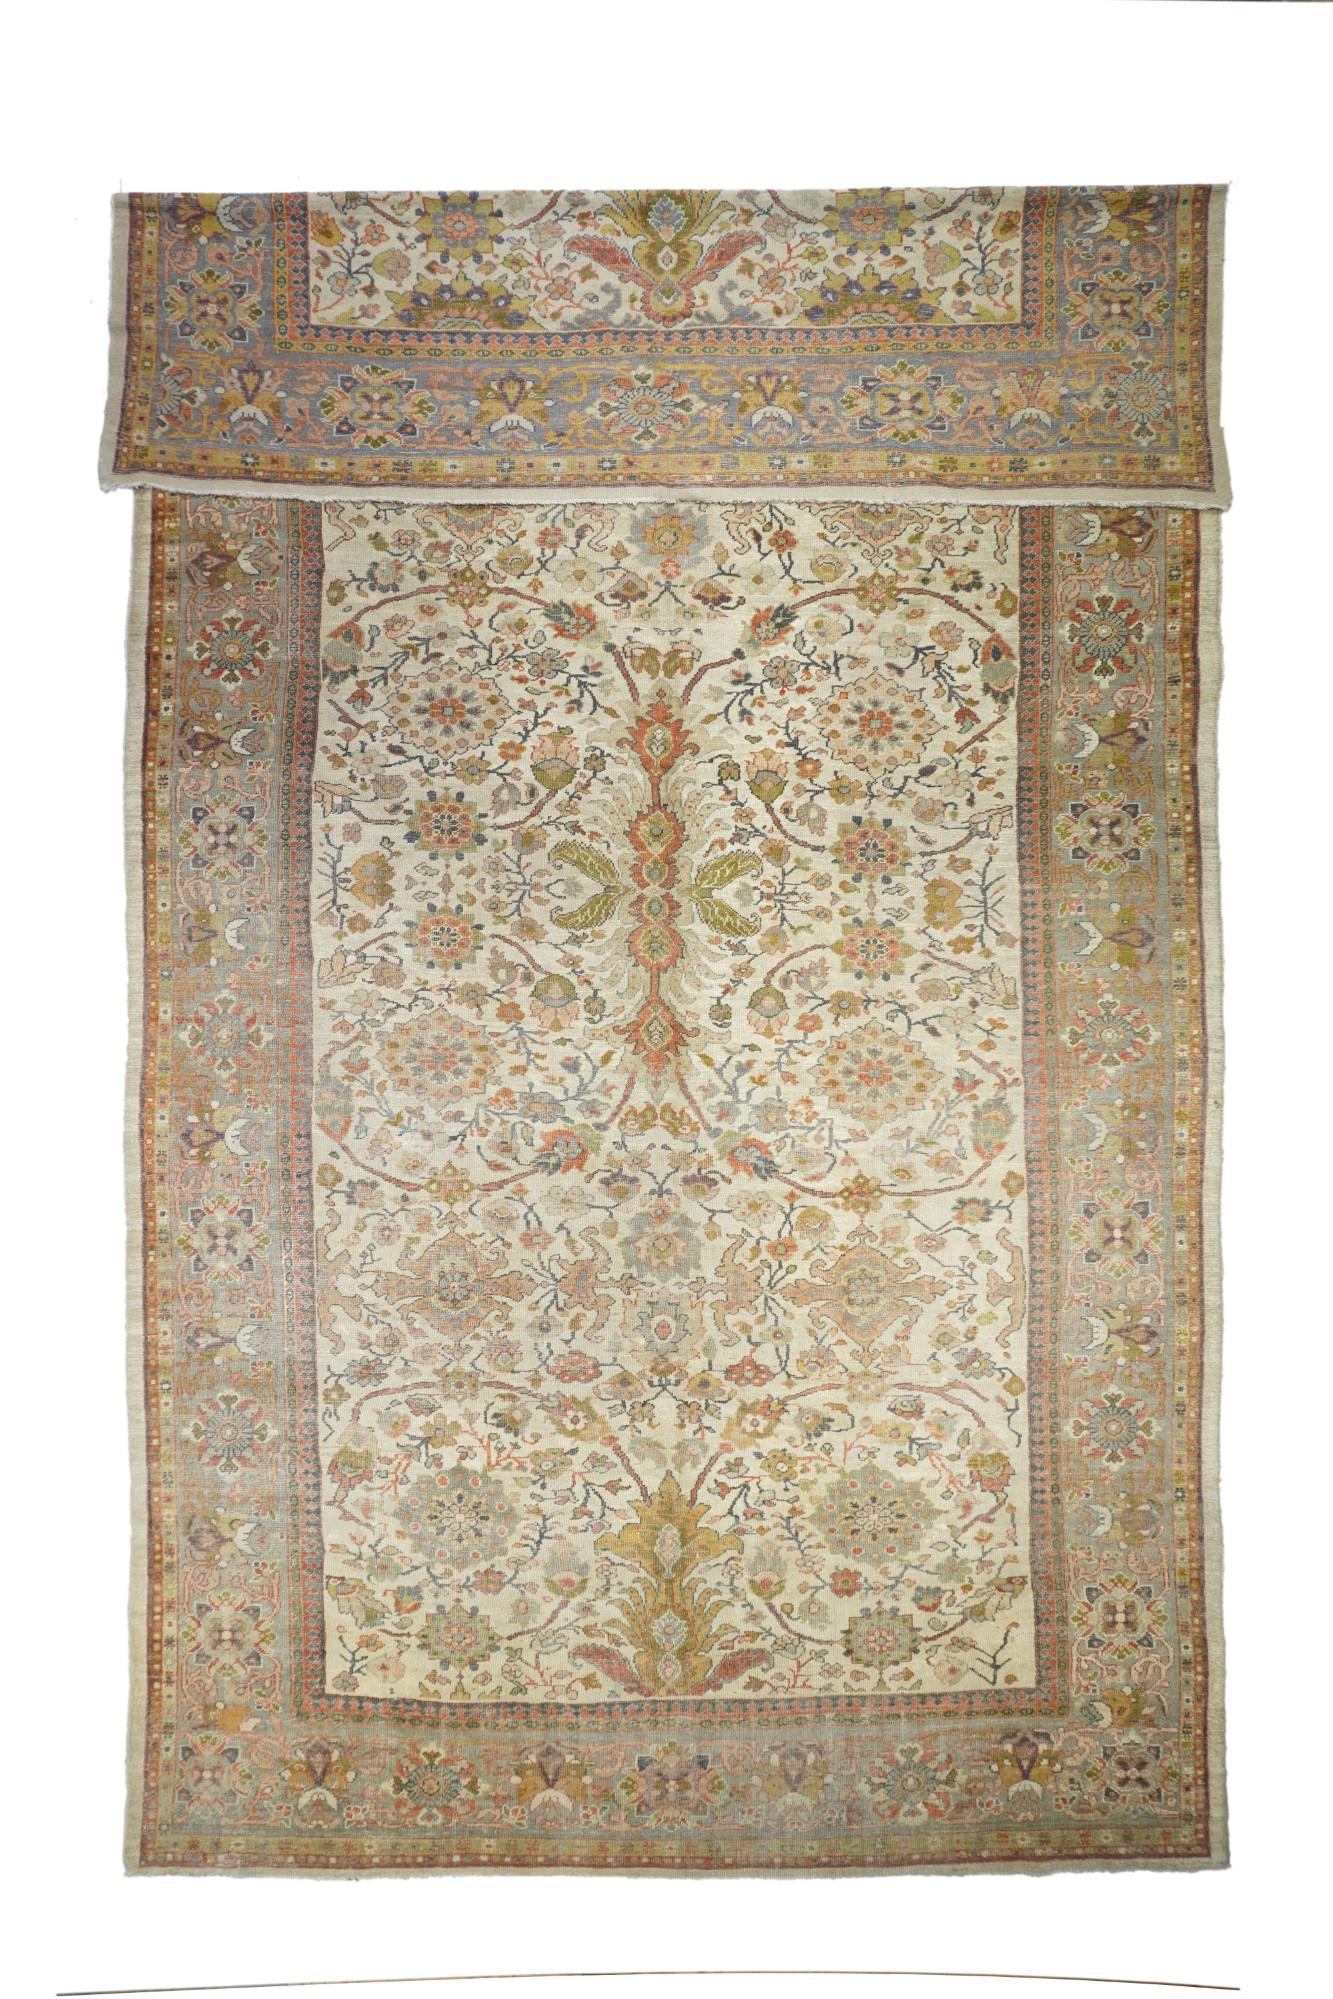 From western Persia, , thuis creamy-straw carepet shows a strong curving arabesque vinery positioning oval palmettes, with a quadruple conjoint rosette and foursickle leaf centre, all accented in rust-red, green and chocolate. Green border with